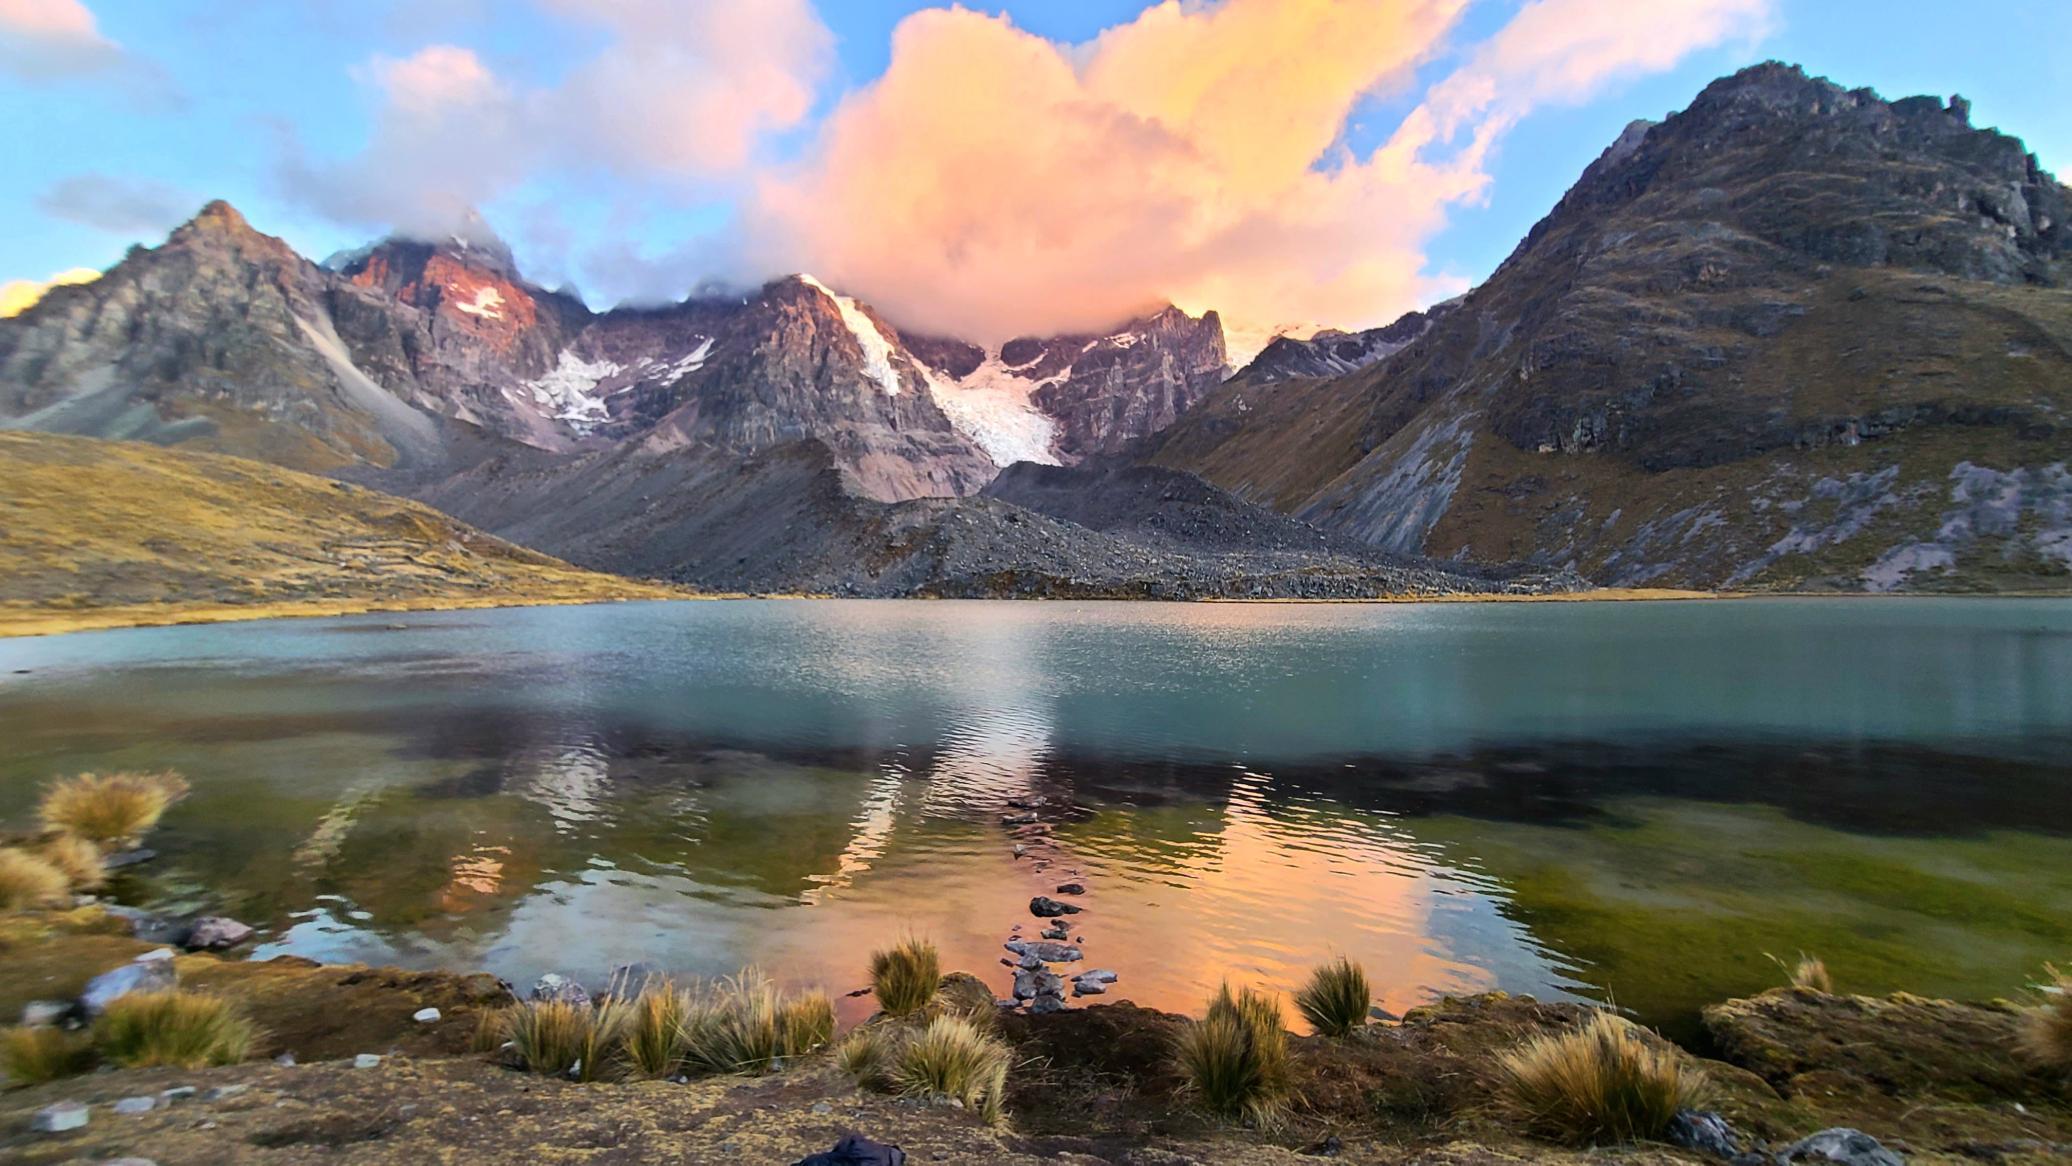 Katie Foster: Mama Qocha, Tayta Urqu: a snow-capped mountain is reflected in an alpine lagoon in the southern Andes of Peru at sunset. Glacial meltwater is the primary source of drinking water in the Andes, especially during the dry season. Lakes and mountains are respected and revered across the region.